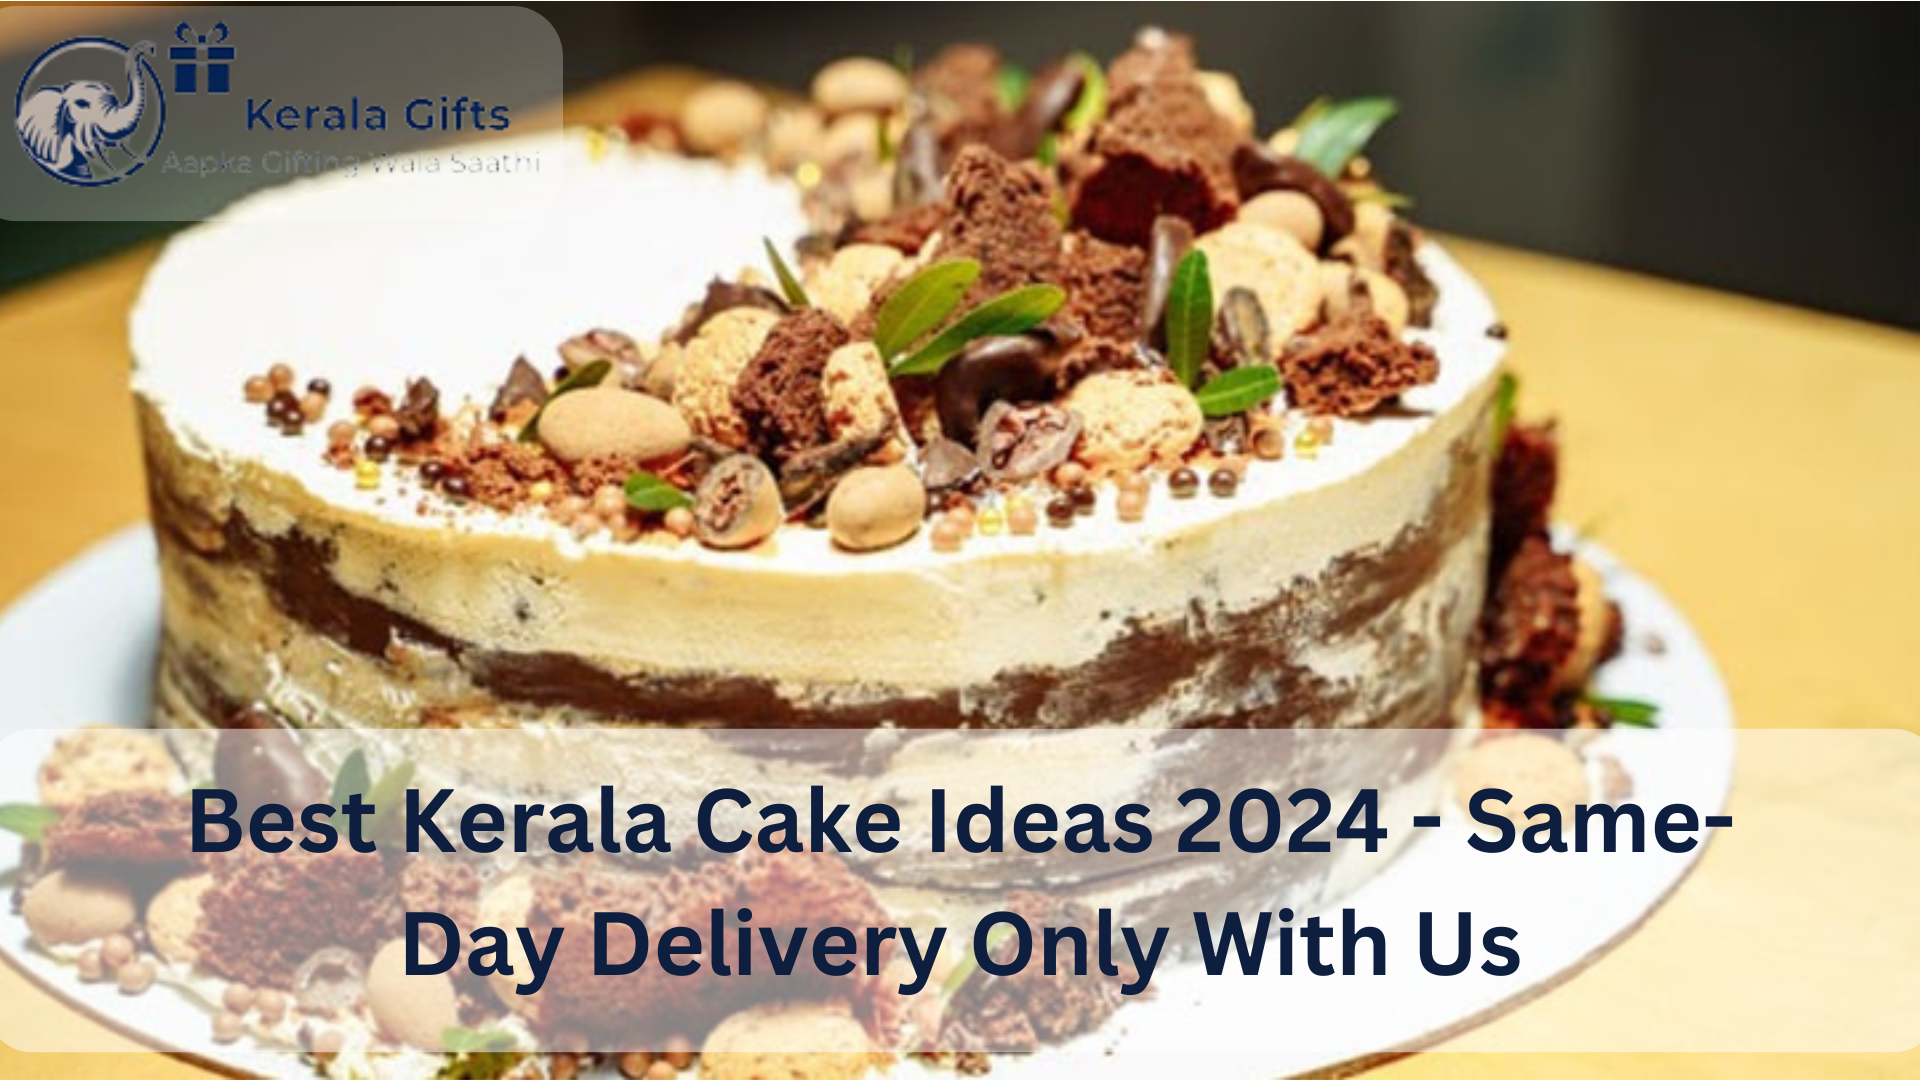 Best Kerala Cake Ideas 2024 - Same-Day Delivery Only With Us